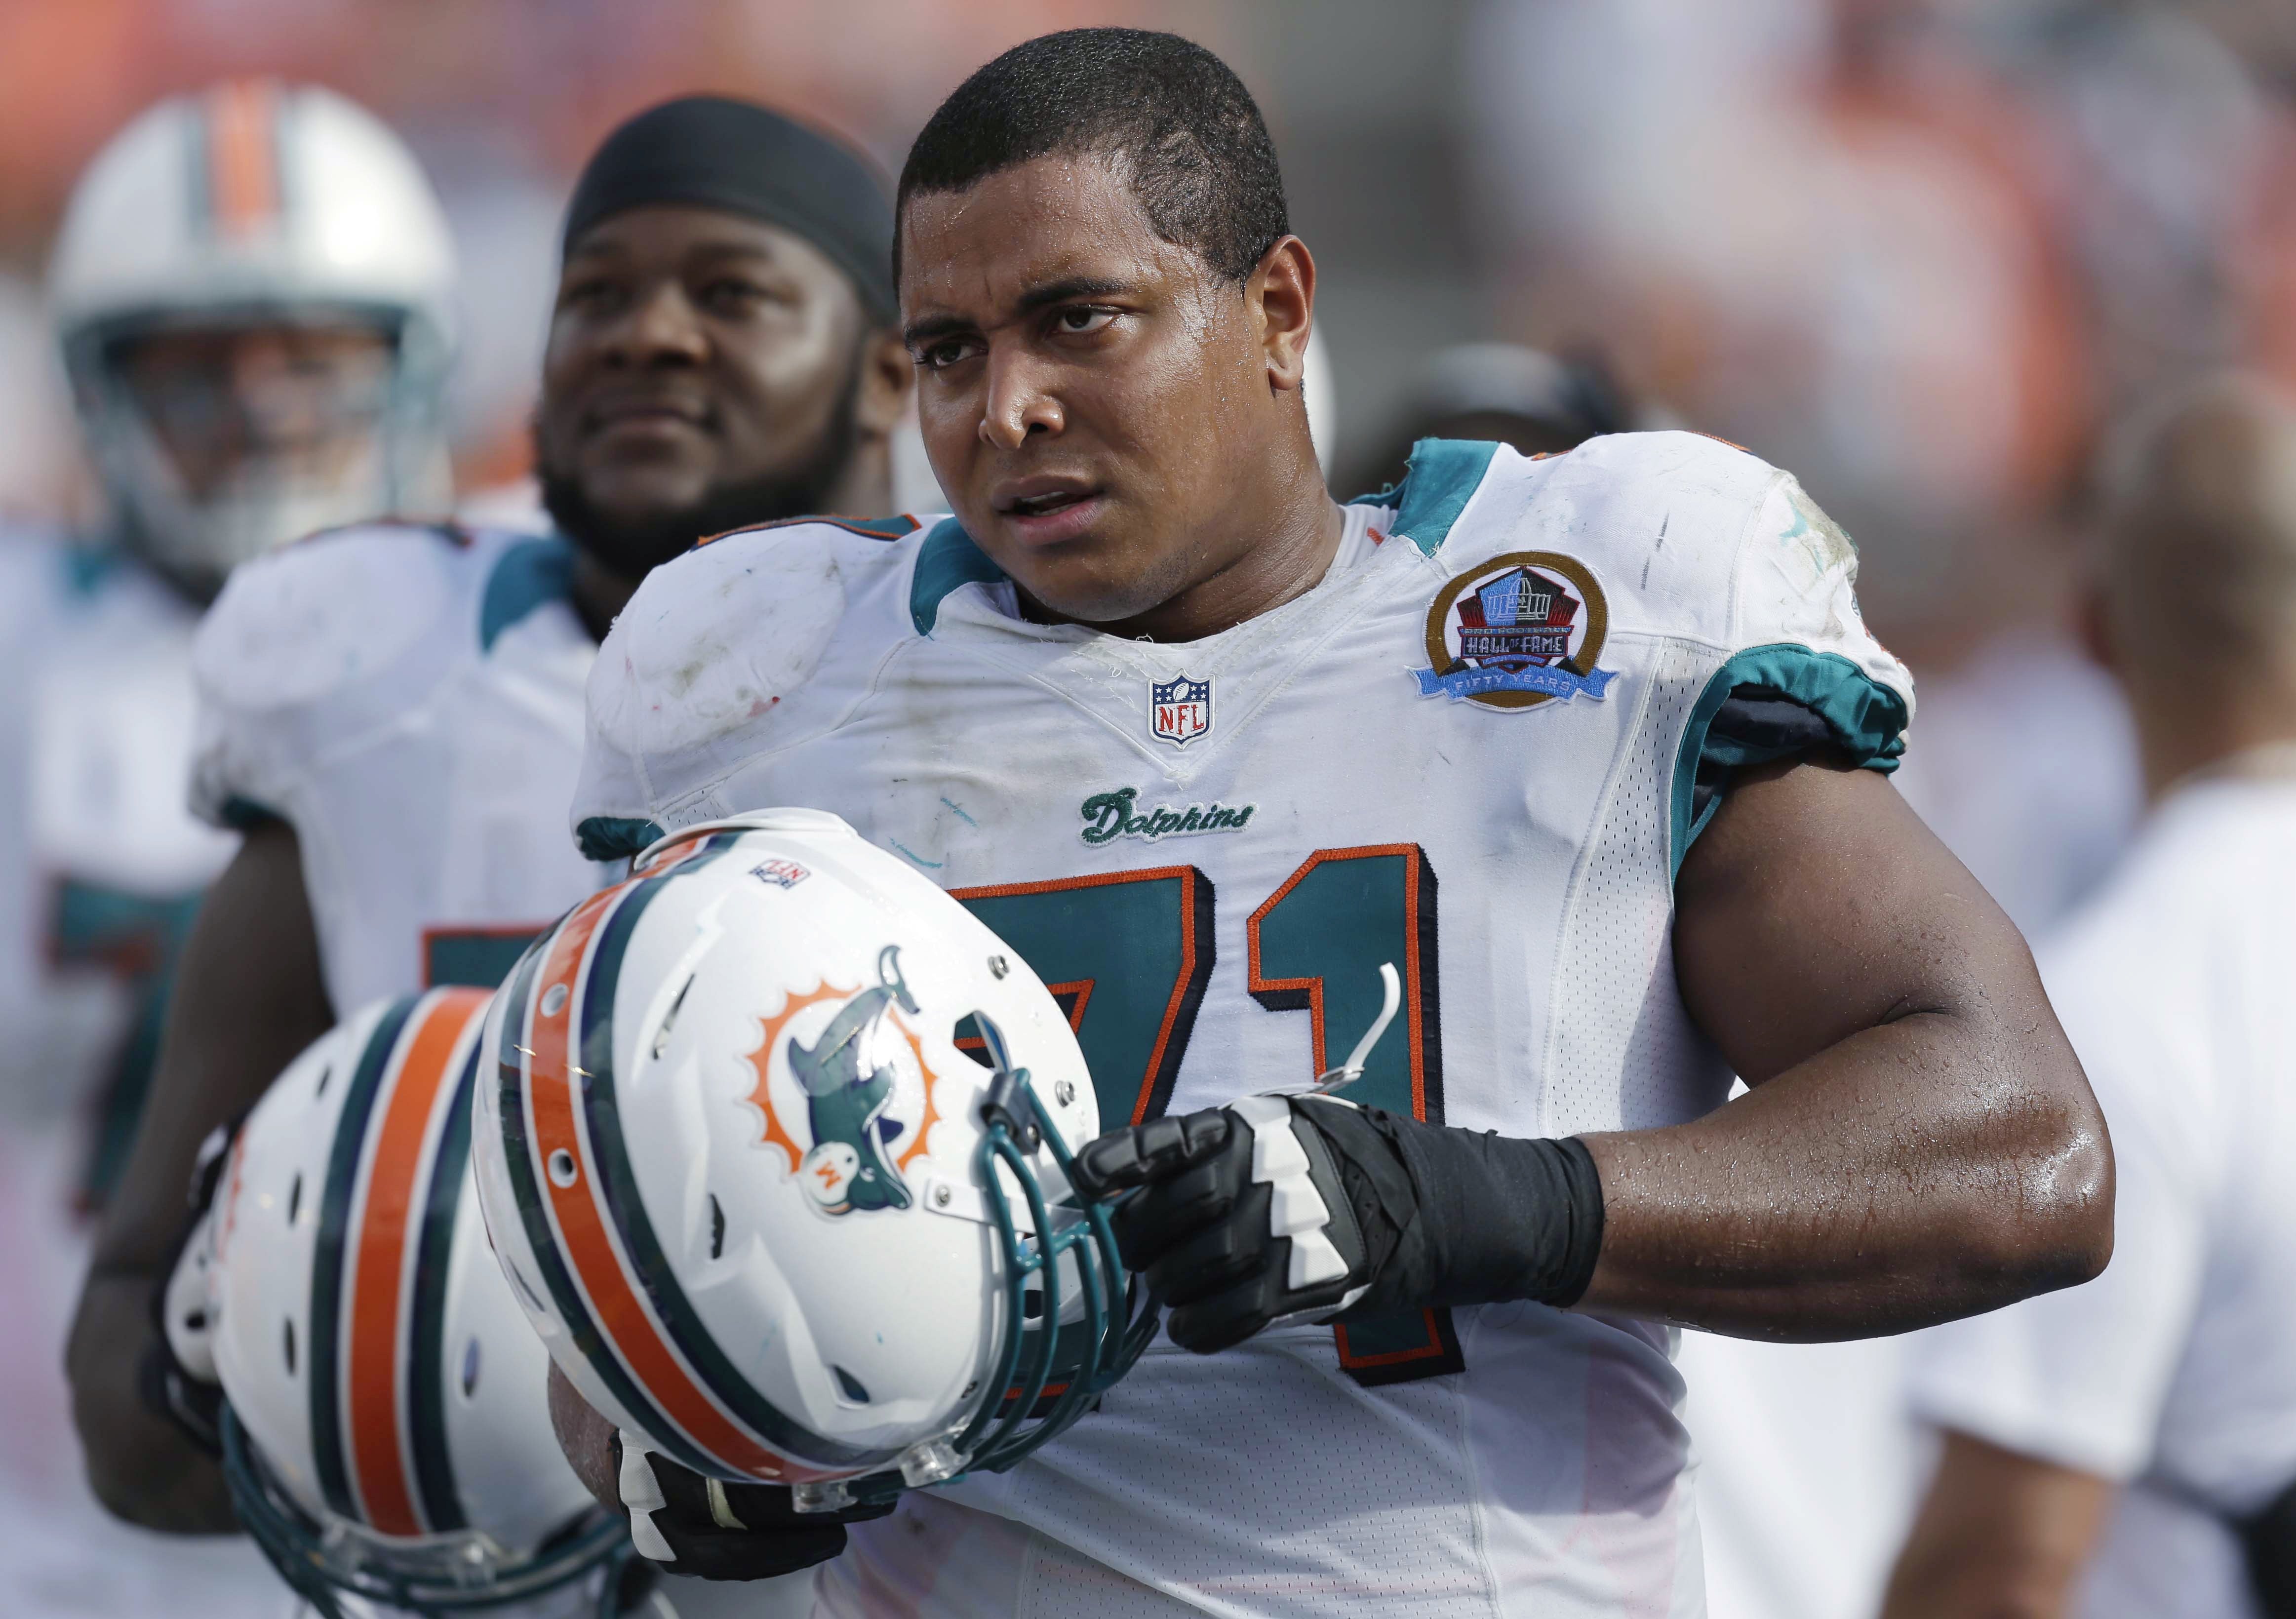 Miami Dolphins tackle Jonathan Martin stands on the sidelines during a Dolphins game in Miami, Dc. 16, 2012. (Wilfredo Lee&mdash;AP)